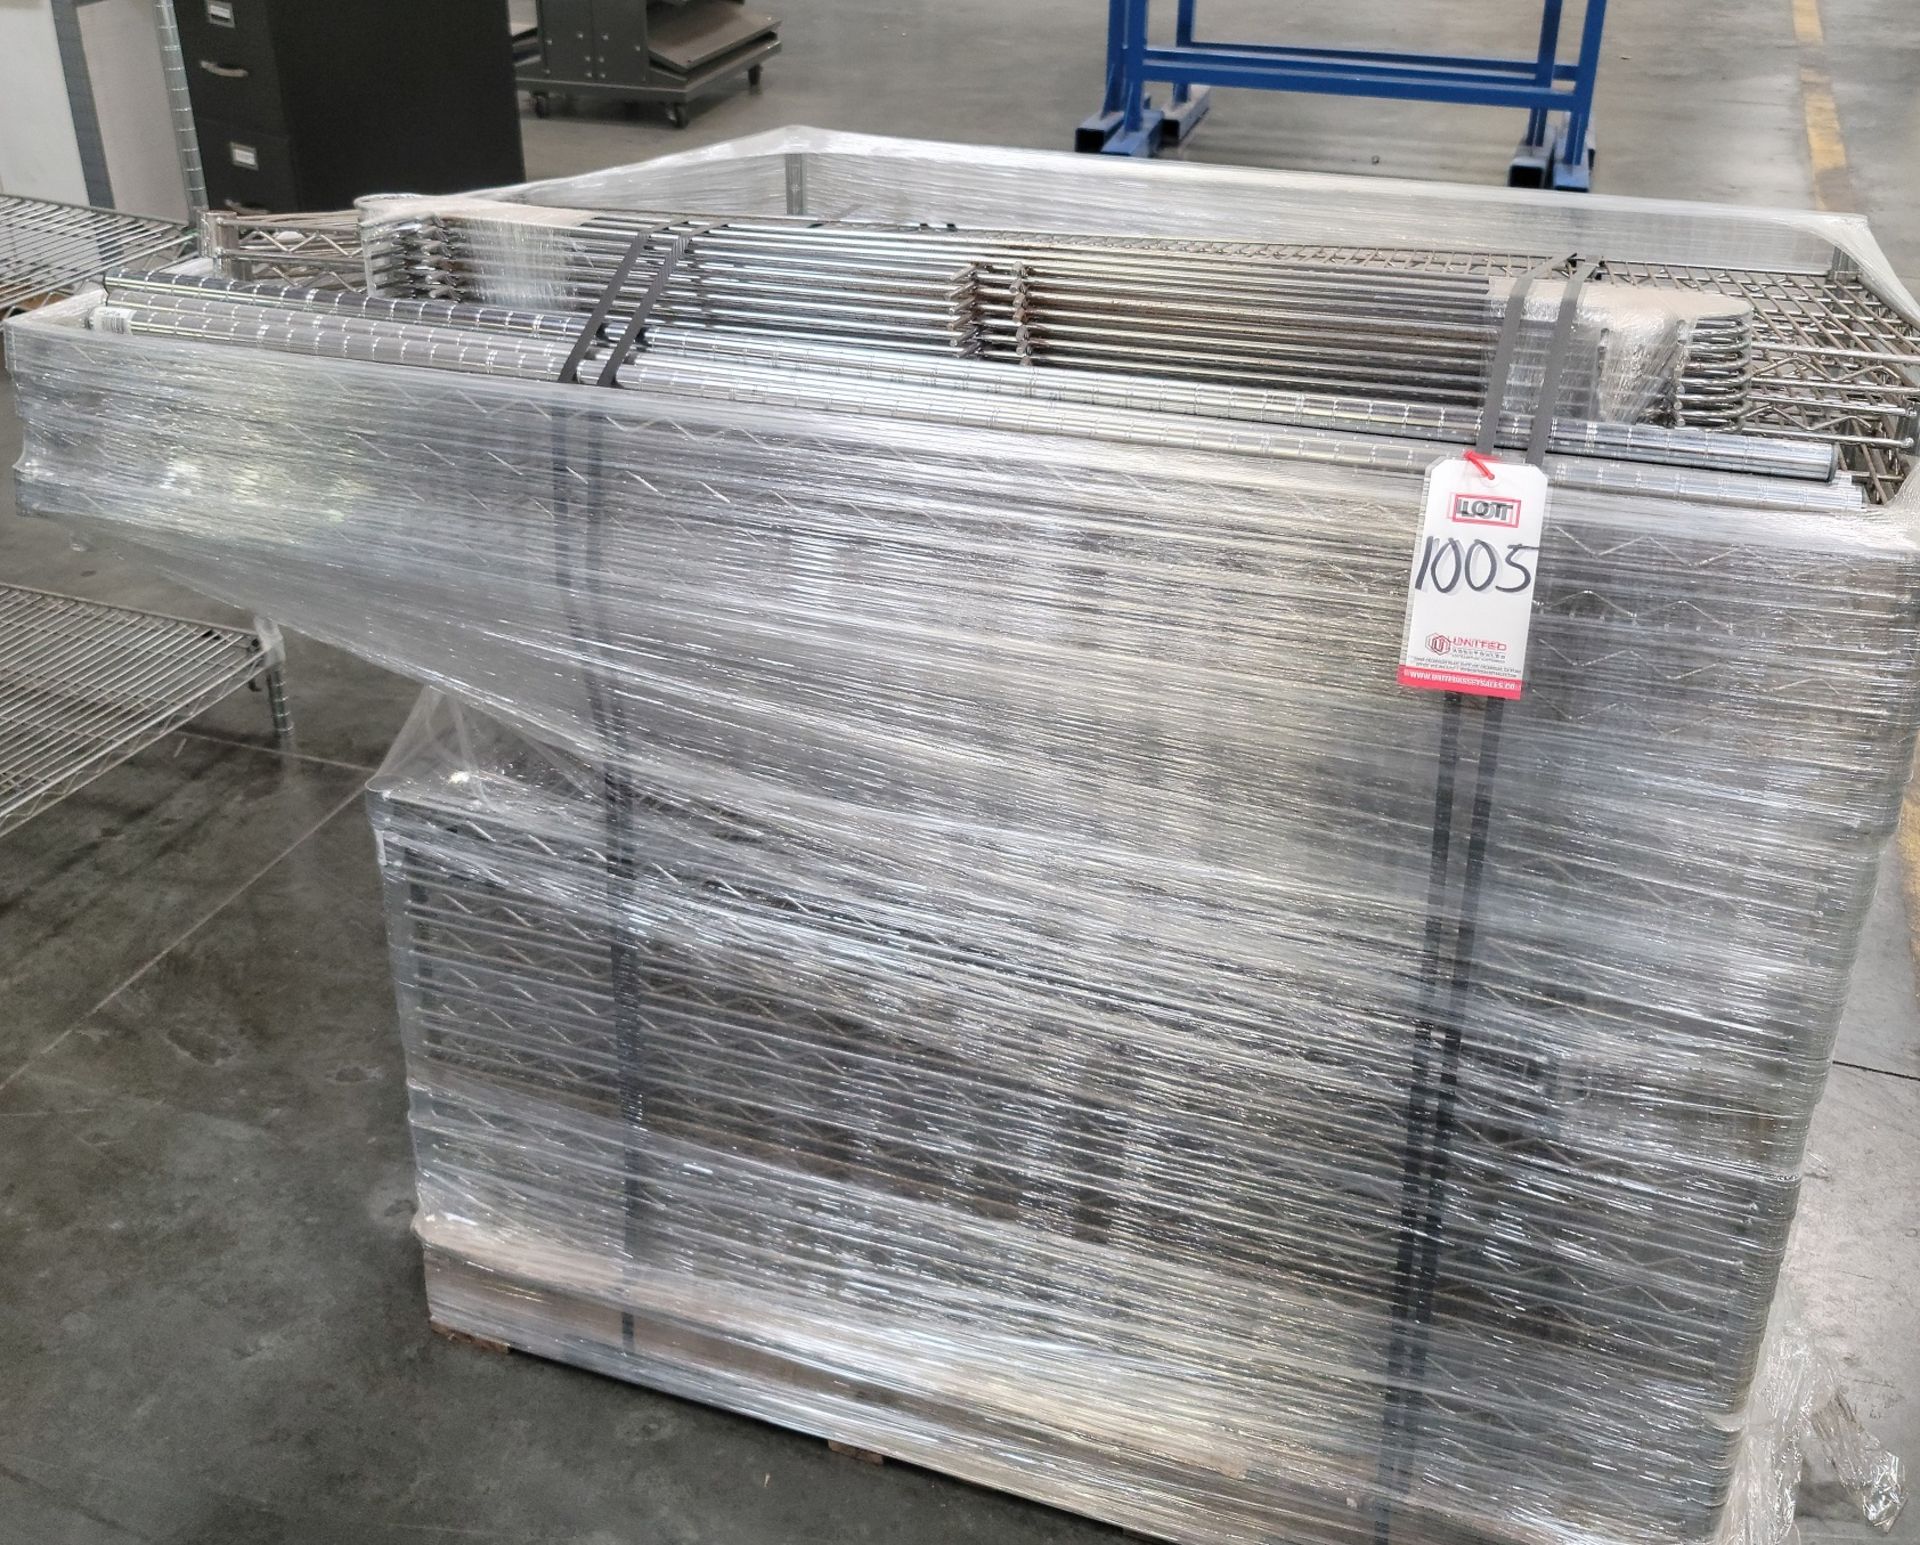 LOT - PALLET OF DISASSEMBLED WIRE RACKS